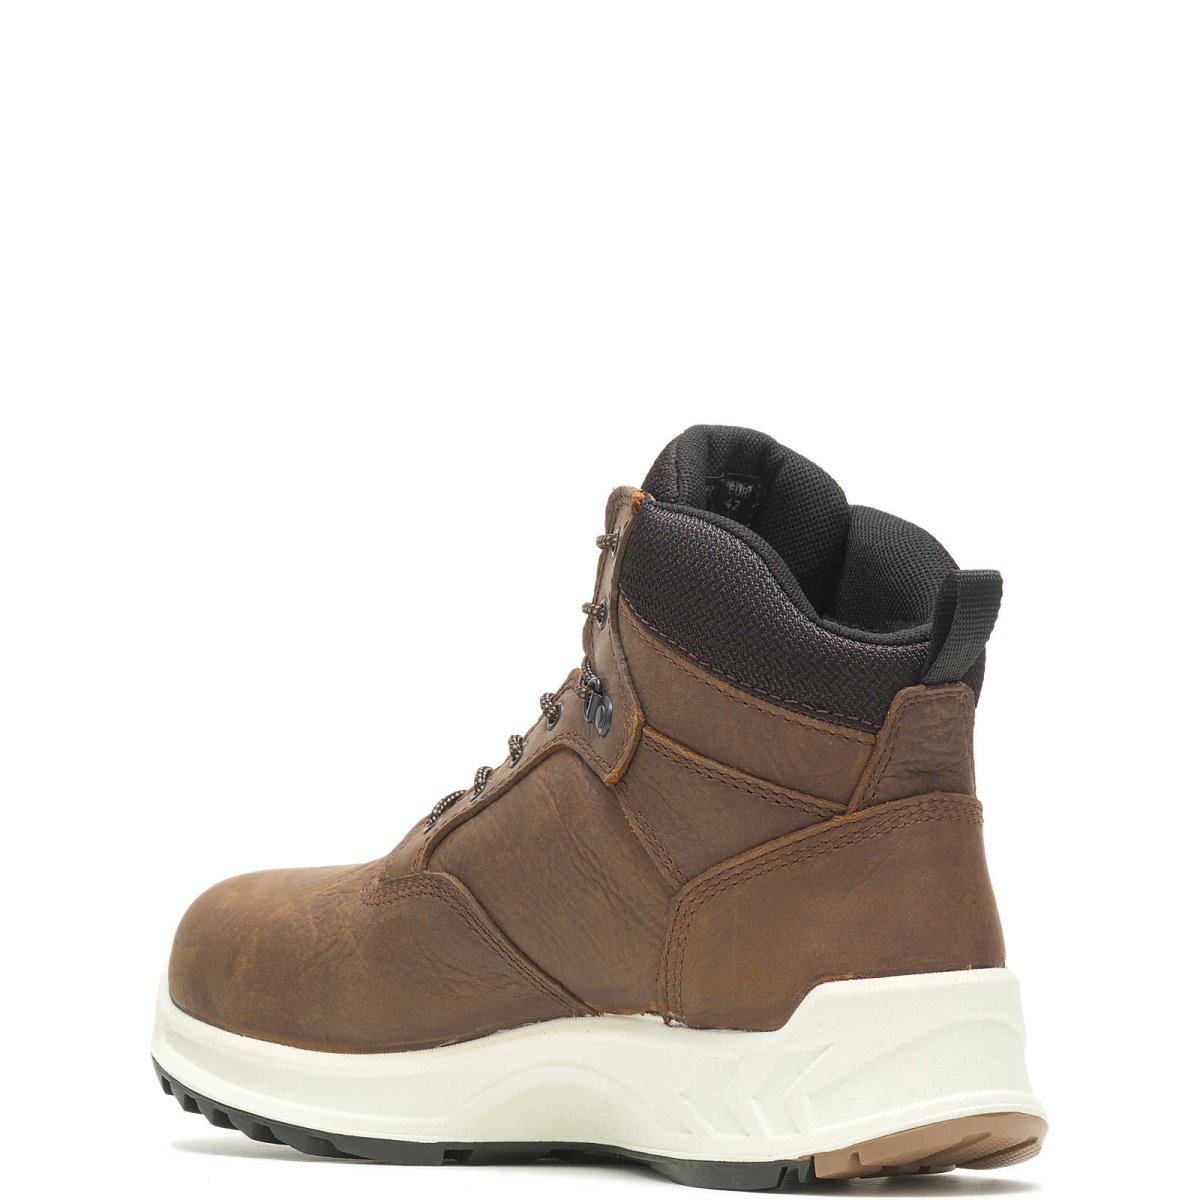 WOLVERINE SHIFTPLUS LX 6" SAFETY TOE MEN'S WORK BOOT (W201156) IN BROWN - TLW Shoes